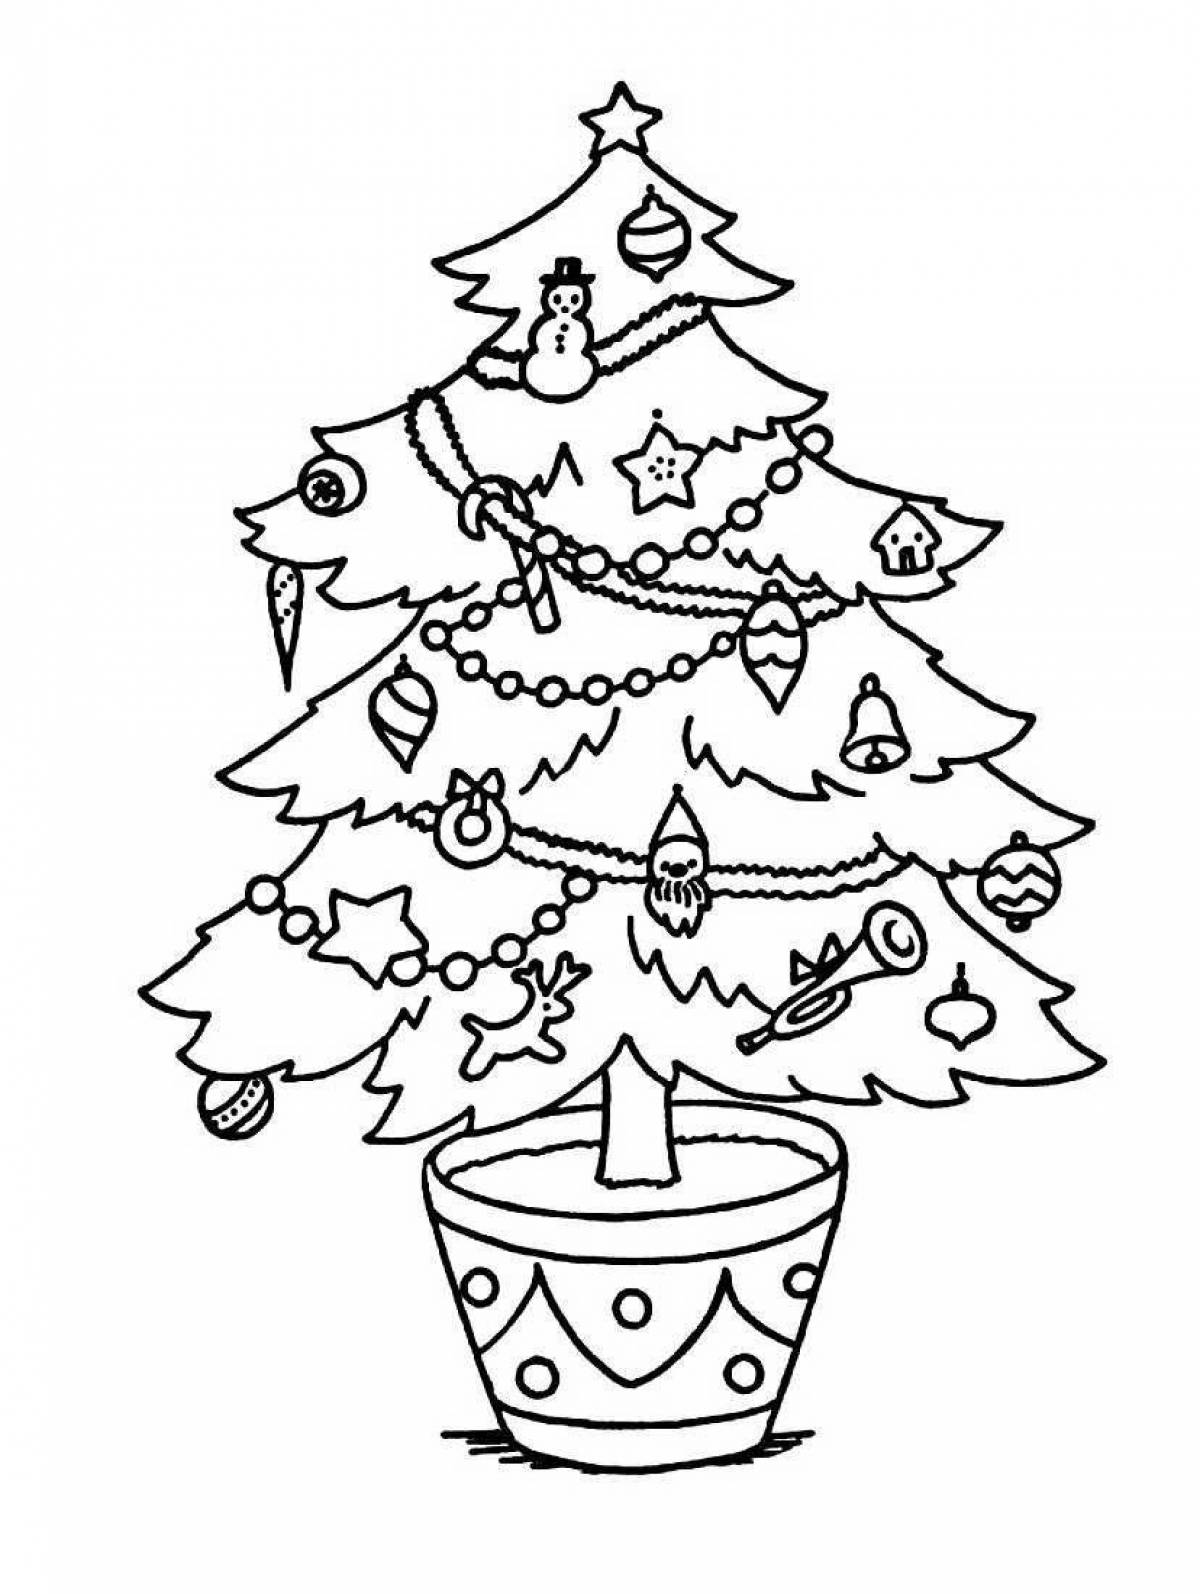 Artistic Christmas tree coloring page